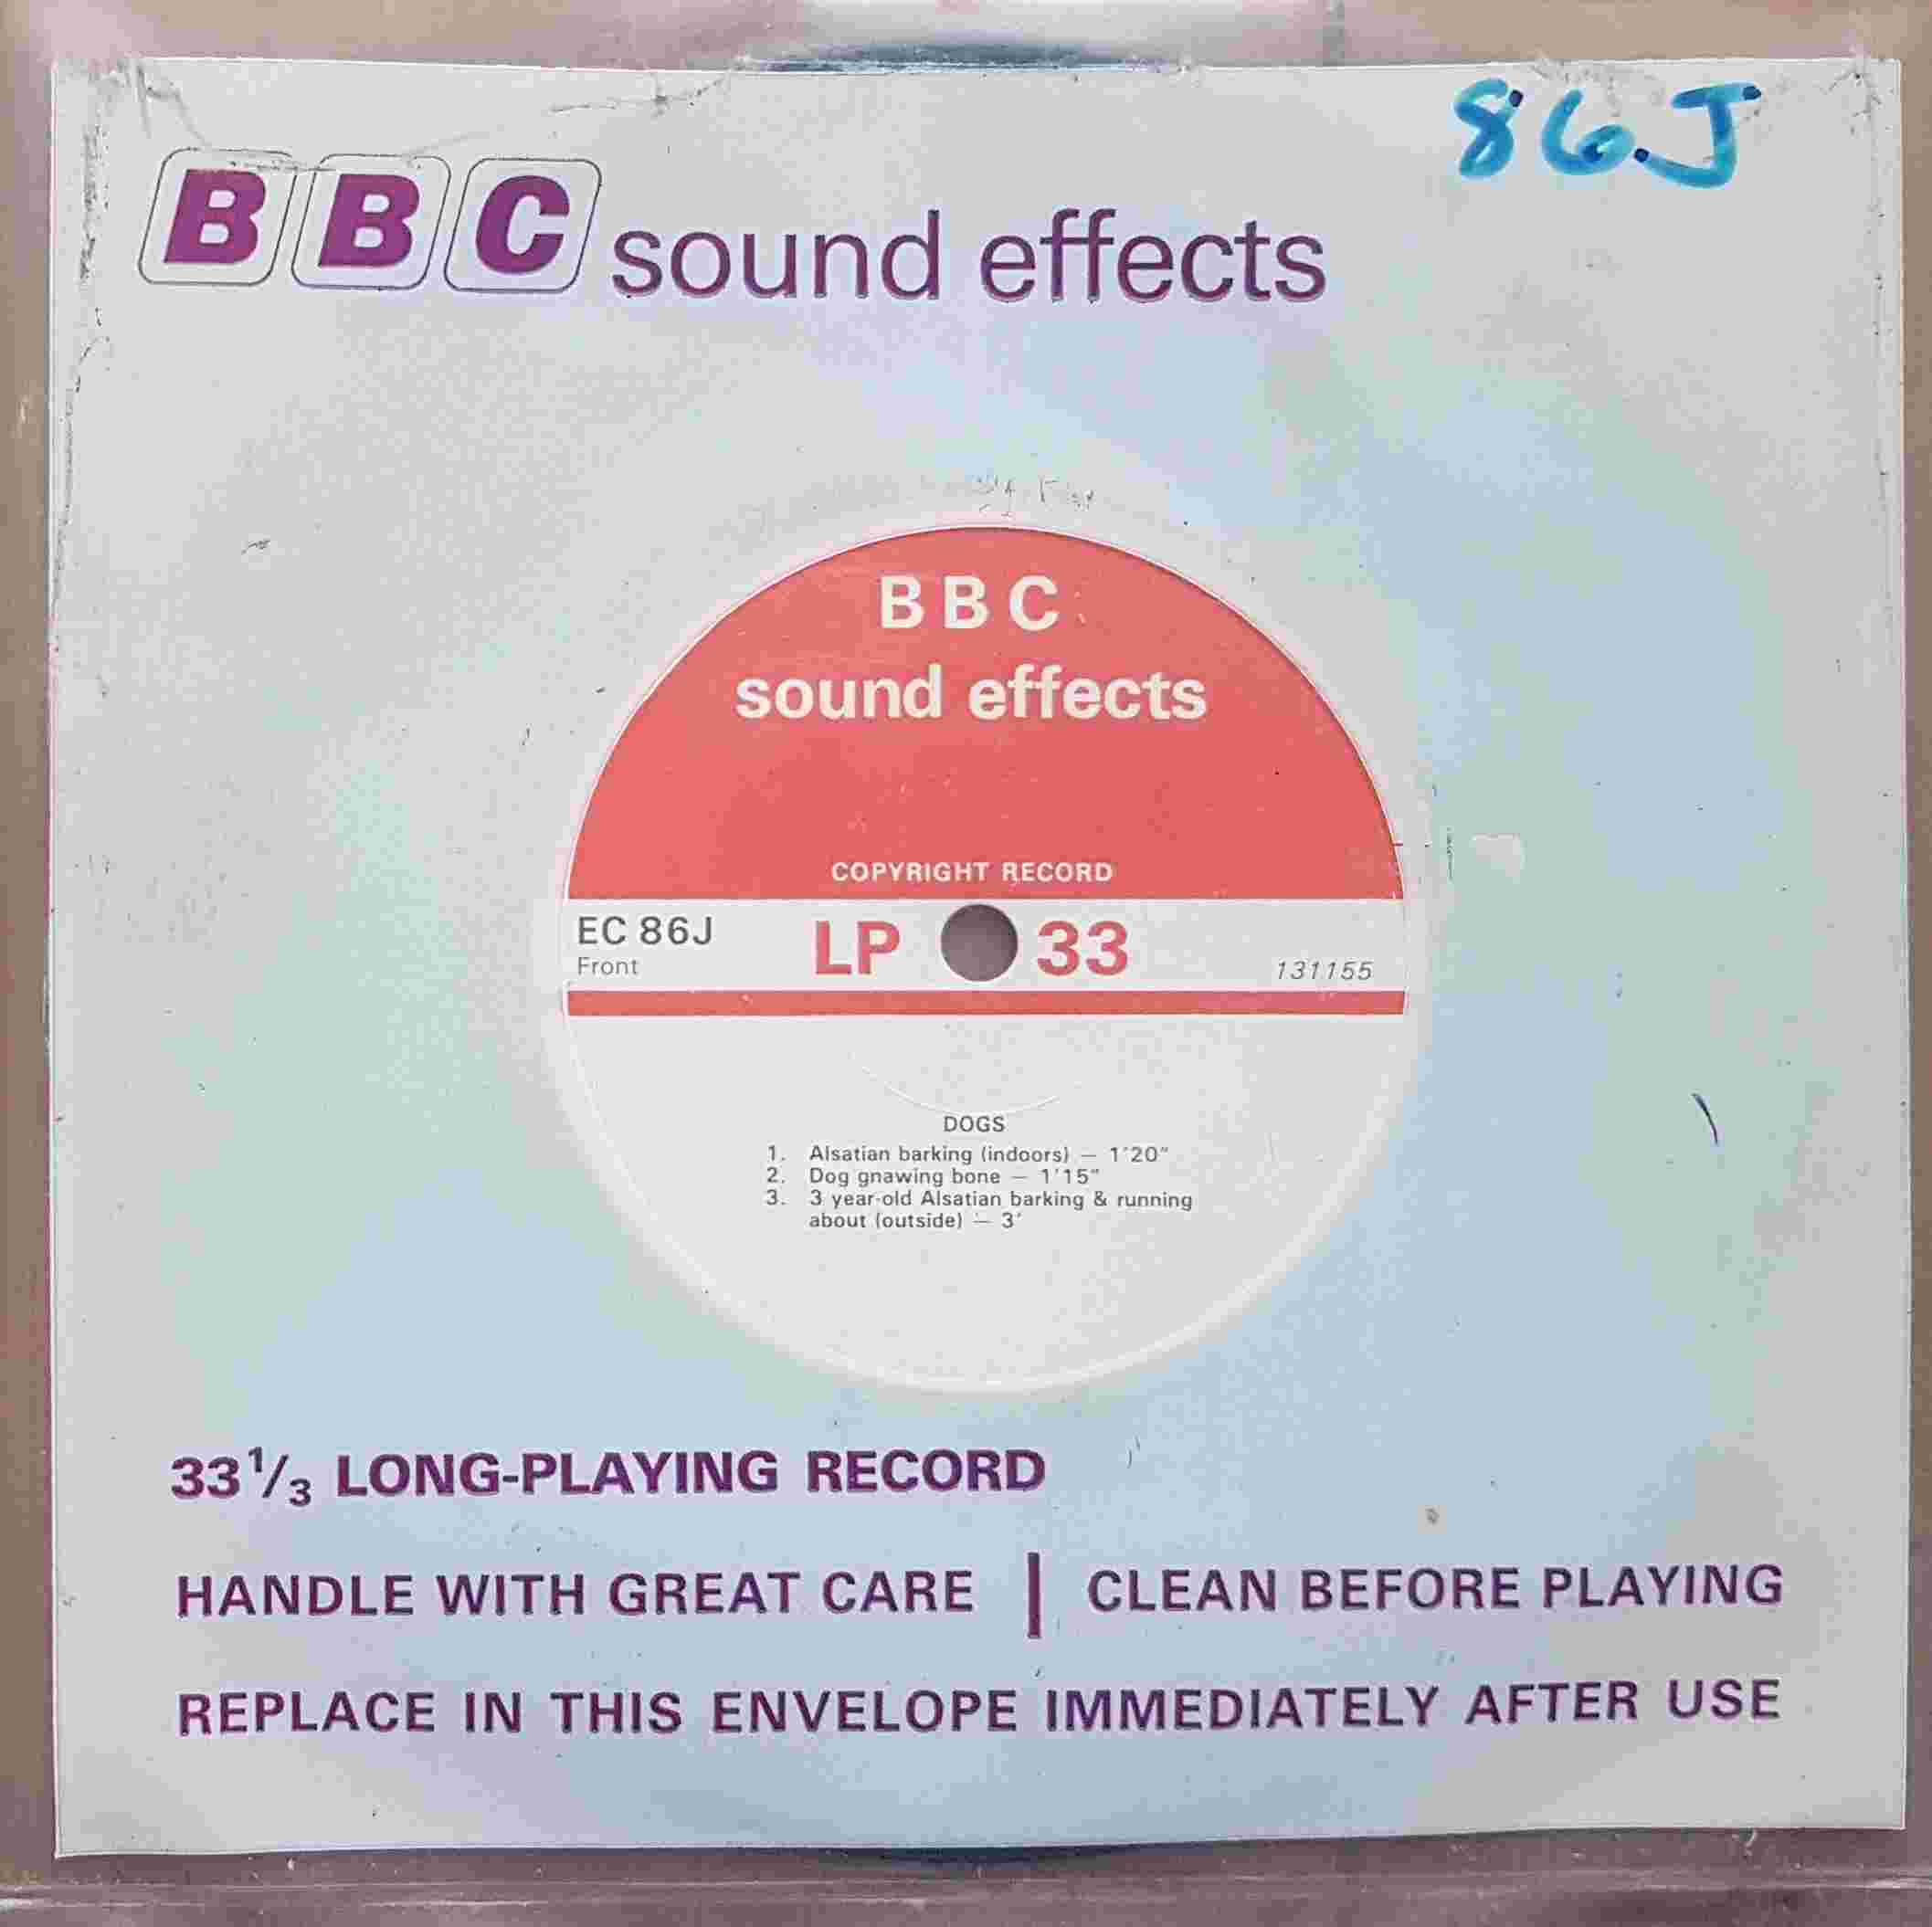 Picture of EC 86J Dogs by artist Not registered from the BBC singles - Records and Tapes library